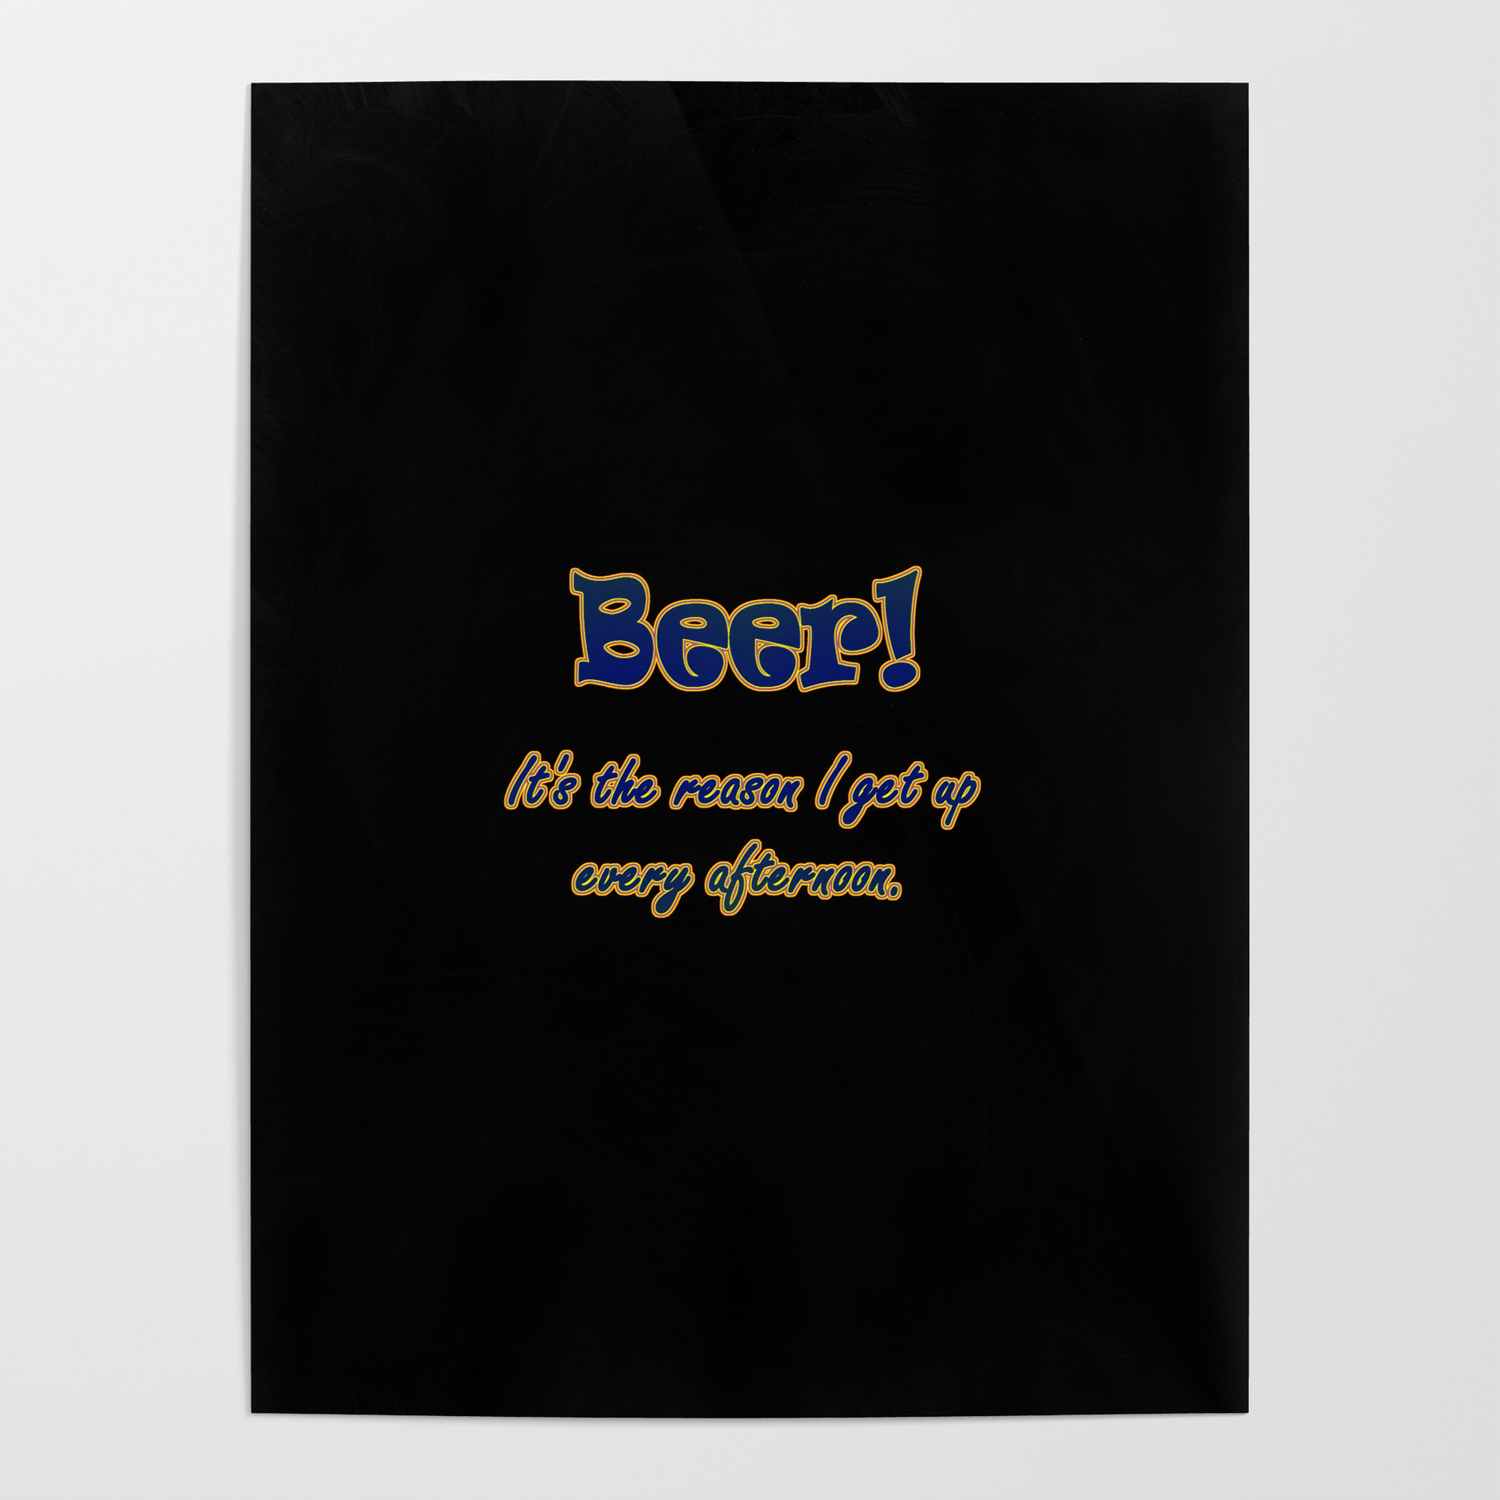 FUNNY HUMOROUS A4 WALL ART BEER JOKE QUALITY PRINT ANY ROOM OFFICE